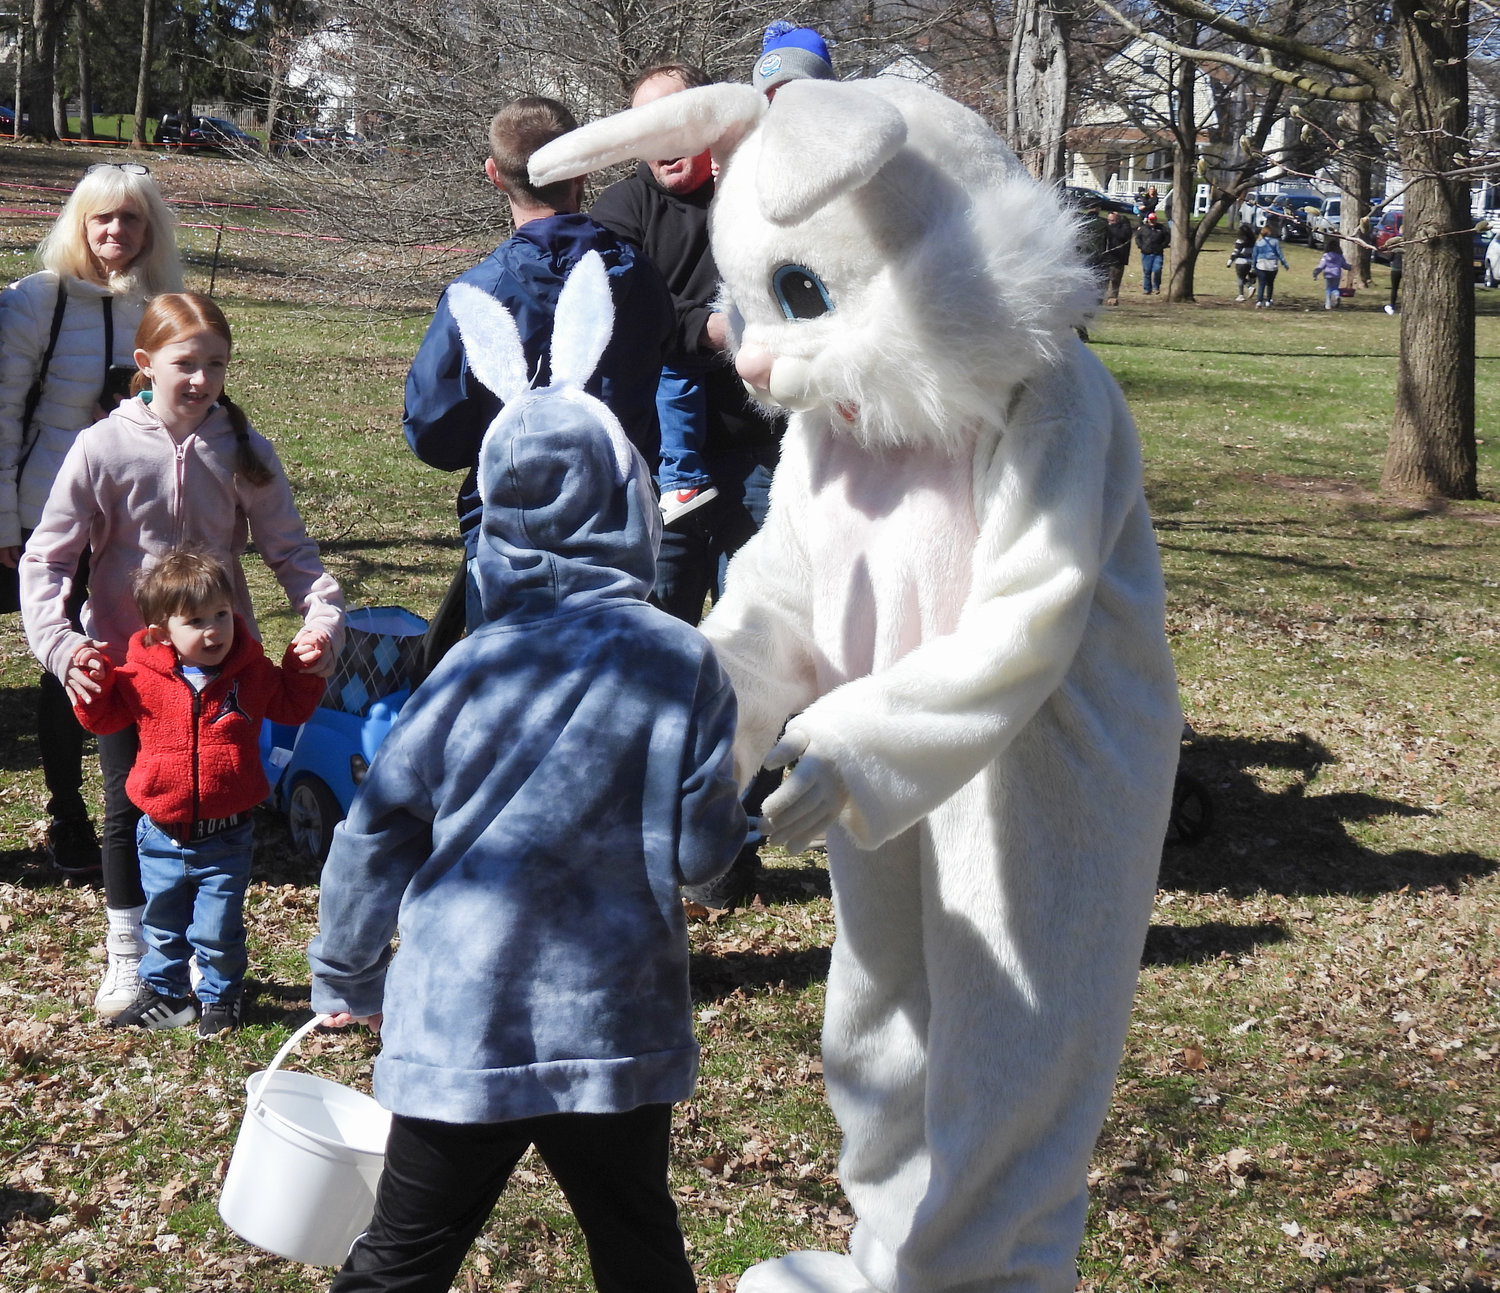 The annual Oneida Easter Egg Hunt saw kids of all ages in Allen Park filling their bags and baskets with eggs on Saturday, April 8 in Oneida. Pictured are children coming up to the Easter Bunny for a hug.